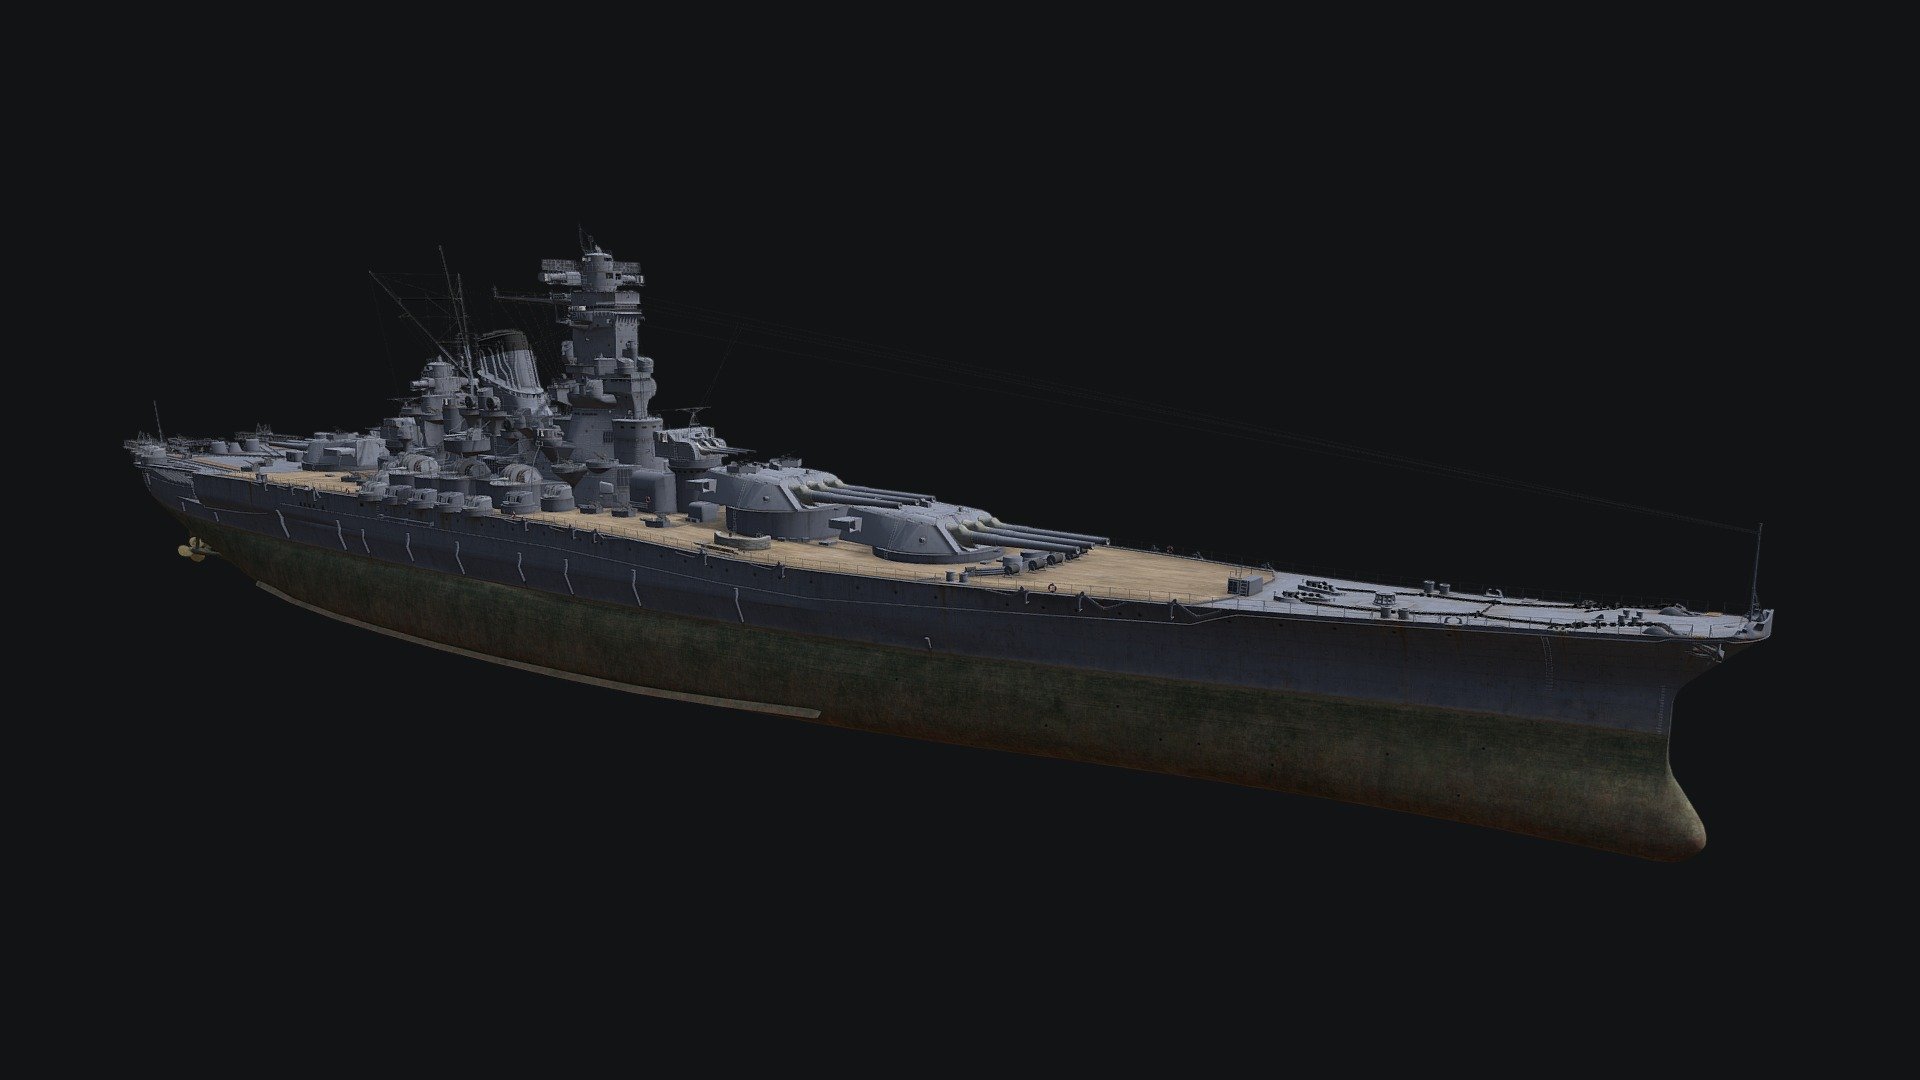 This model was developed by Wargaming for their popular game ‘World of Warships’. Play World of Warships now to send these ships into battle!

Use the following link to start playing!

https://worldofwarships.com/

Yamato — Japanese Tier X battleship.

The biggest warship of World War II and the world's largest battleship. Yamato was designed around the idea that an individual ship could have superiority over any battleship of a potential enemy. Her main guns had overwhelming firepower. The ship maintained a very high level of survivability due to reliable armor and robust torpedo protection. Yamato’s AA capabilities were highly efficient due to carrying numerous AA artillery guns 3d model